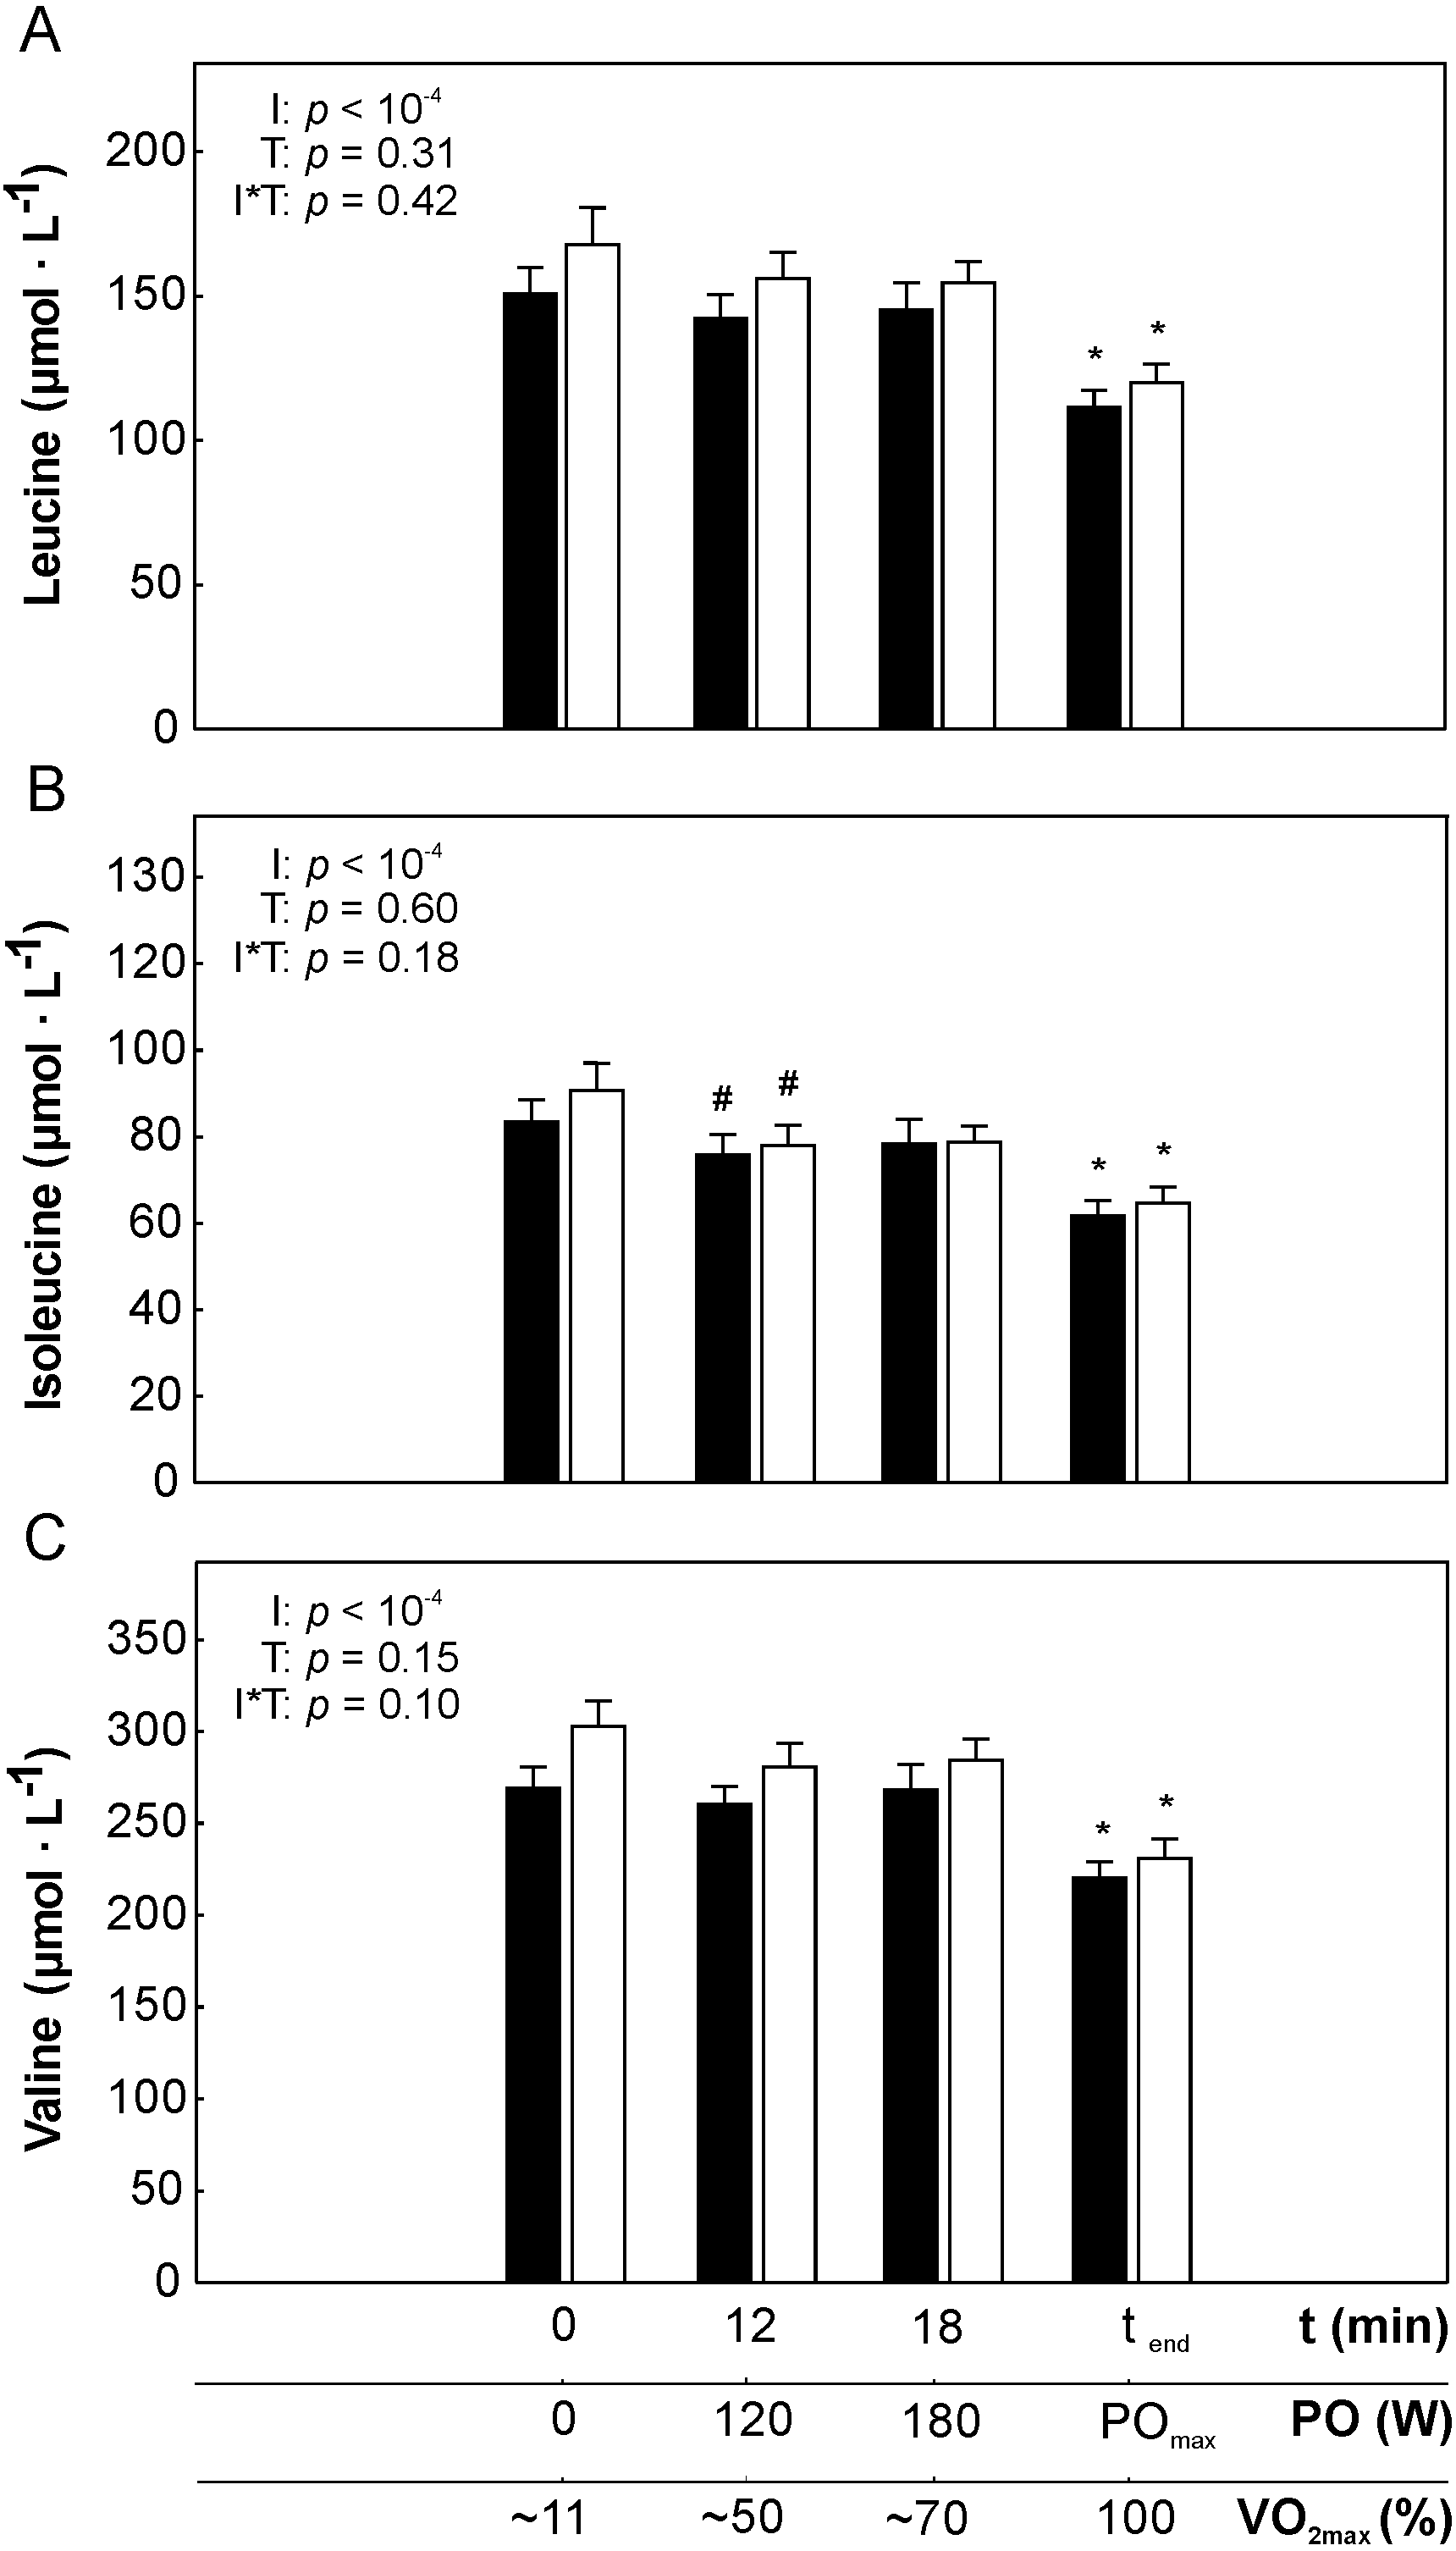 Plasma BCAA concentrations during exercise of varied intensities